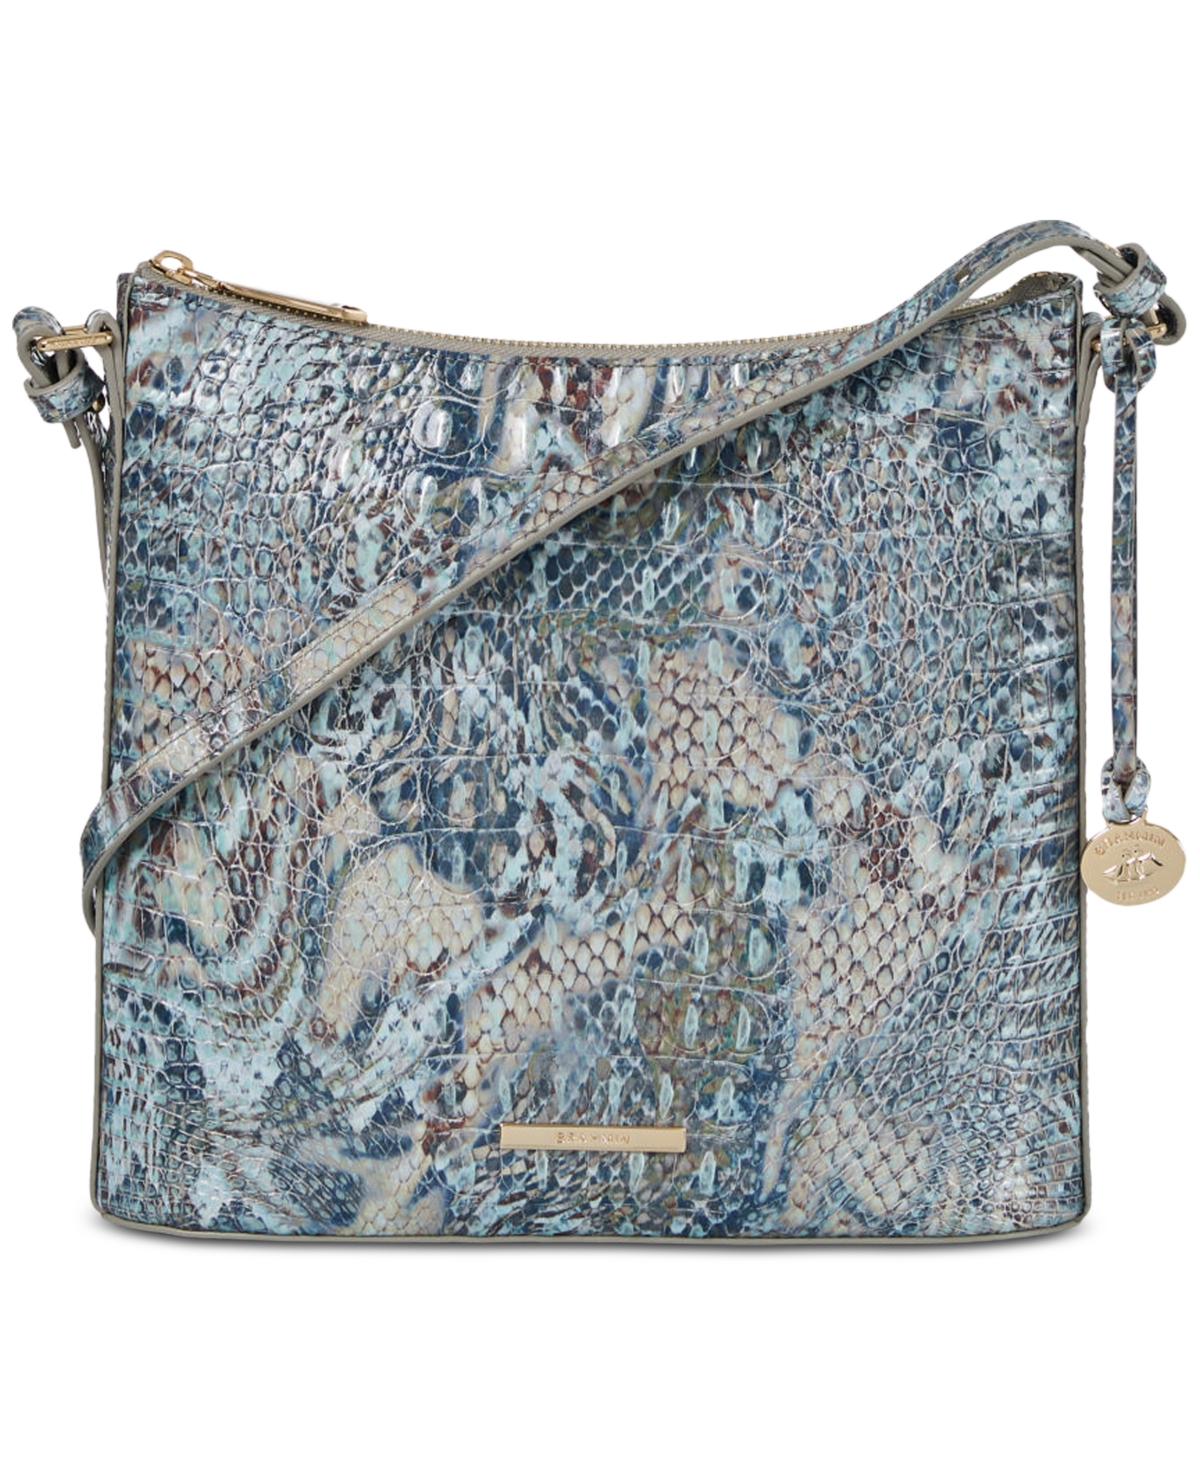 Brahmin Katie Melbourne Embossed Leather Crossbody In Icy Python Melbourne